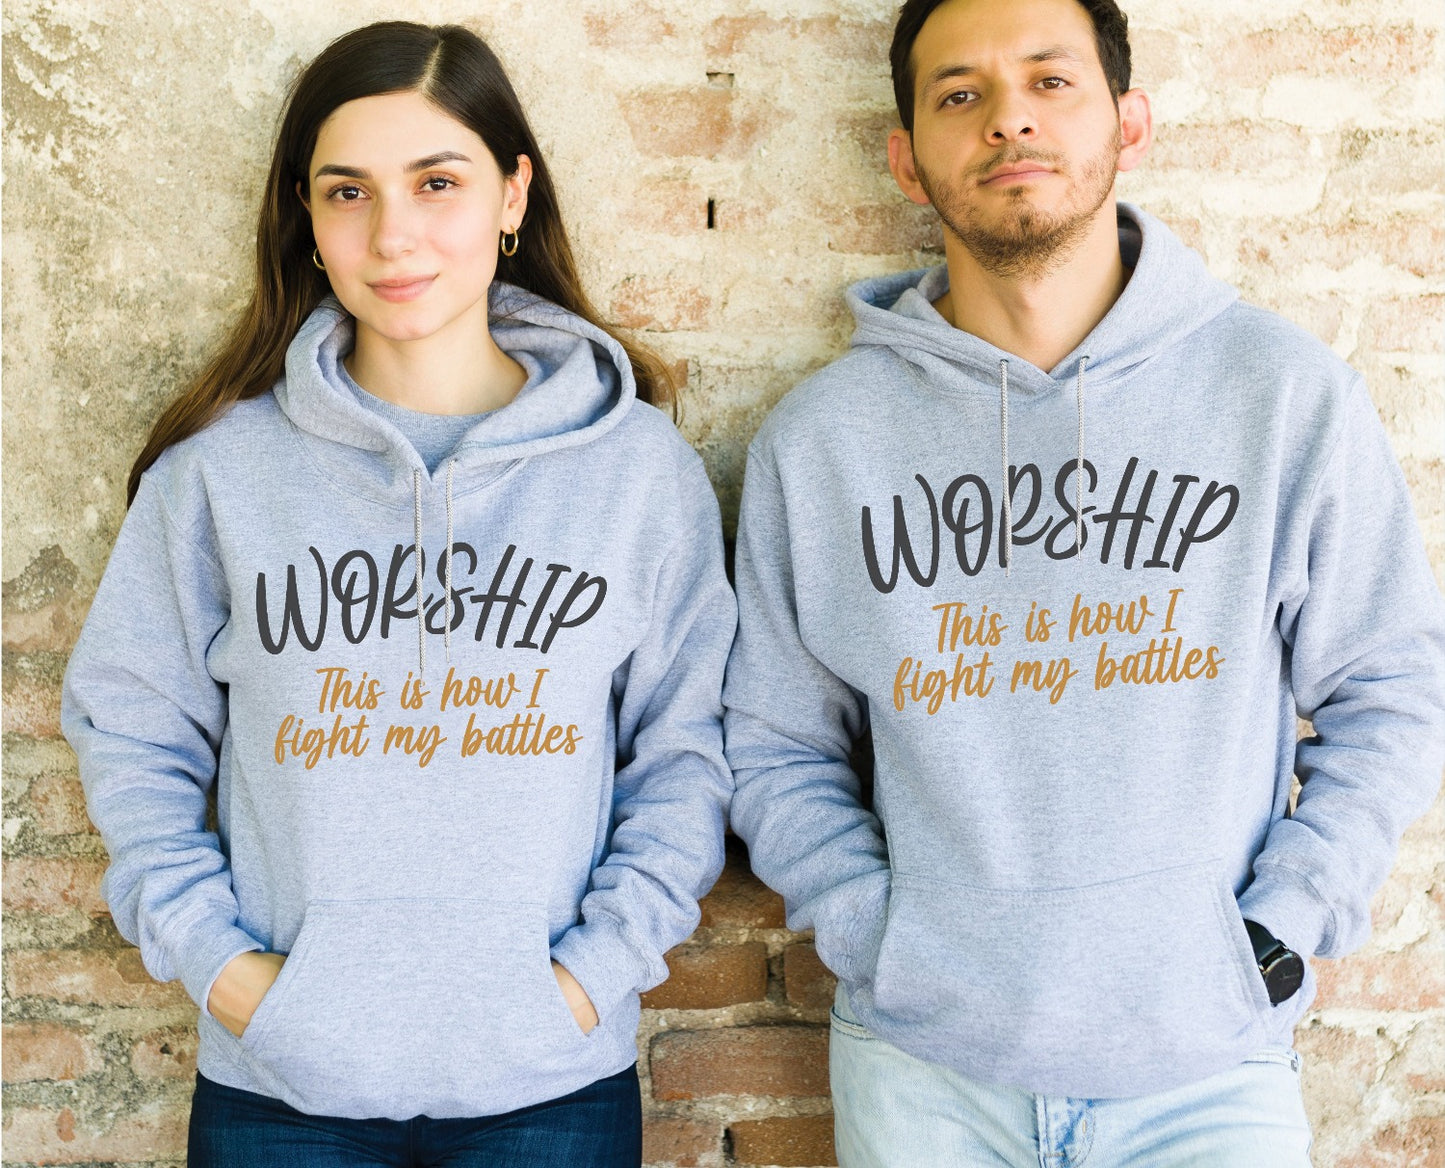 Worship This Is How I Fight My Battles Christian aesthetic design printed in charcoal and gold on cozy heather gray unisex hoodie for women and men, great gift for worship leaders